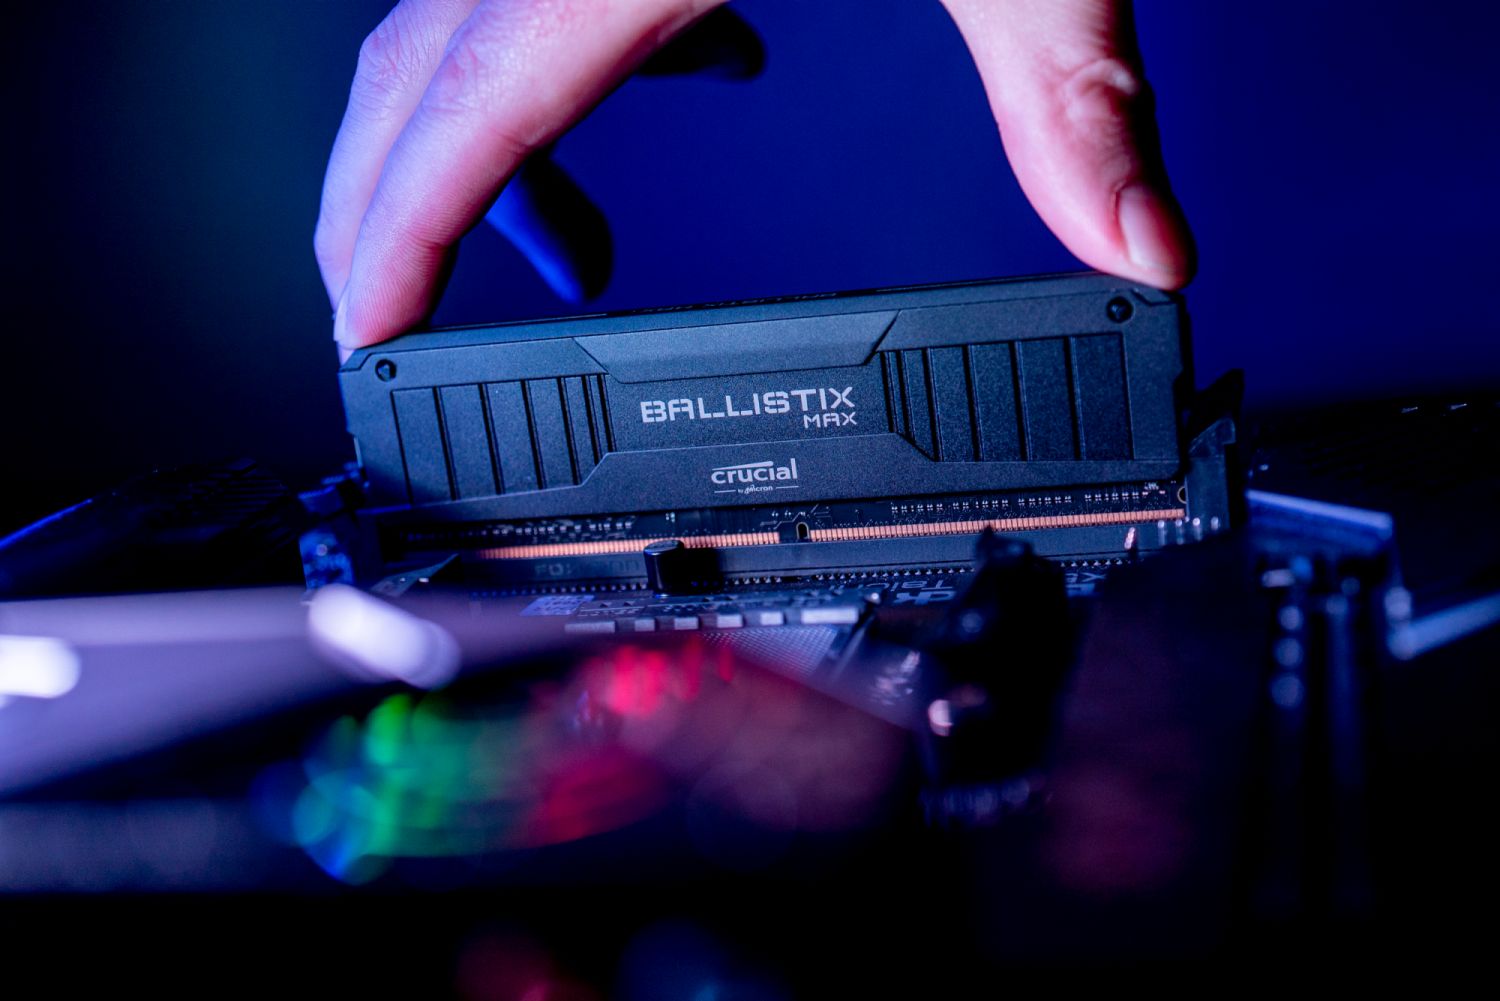 https://www.crucial.in/content/dam/crucial/dram-products/ballistix-max-udimm/images/in-use/Crucial-Ballistix-Extensive-Compatibility-MAX-Image.psd.transform/large-jpg/img.jpg